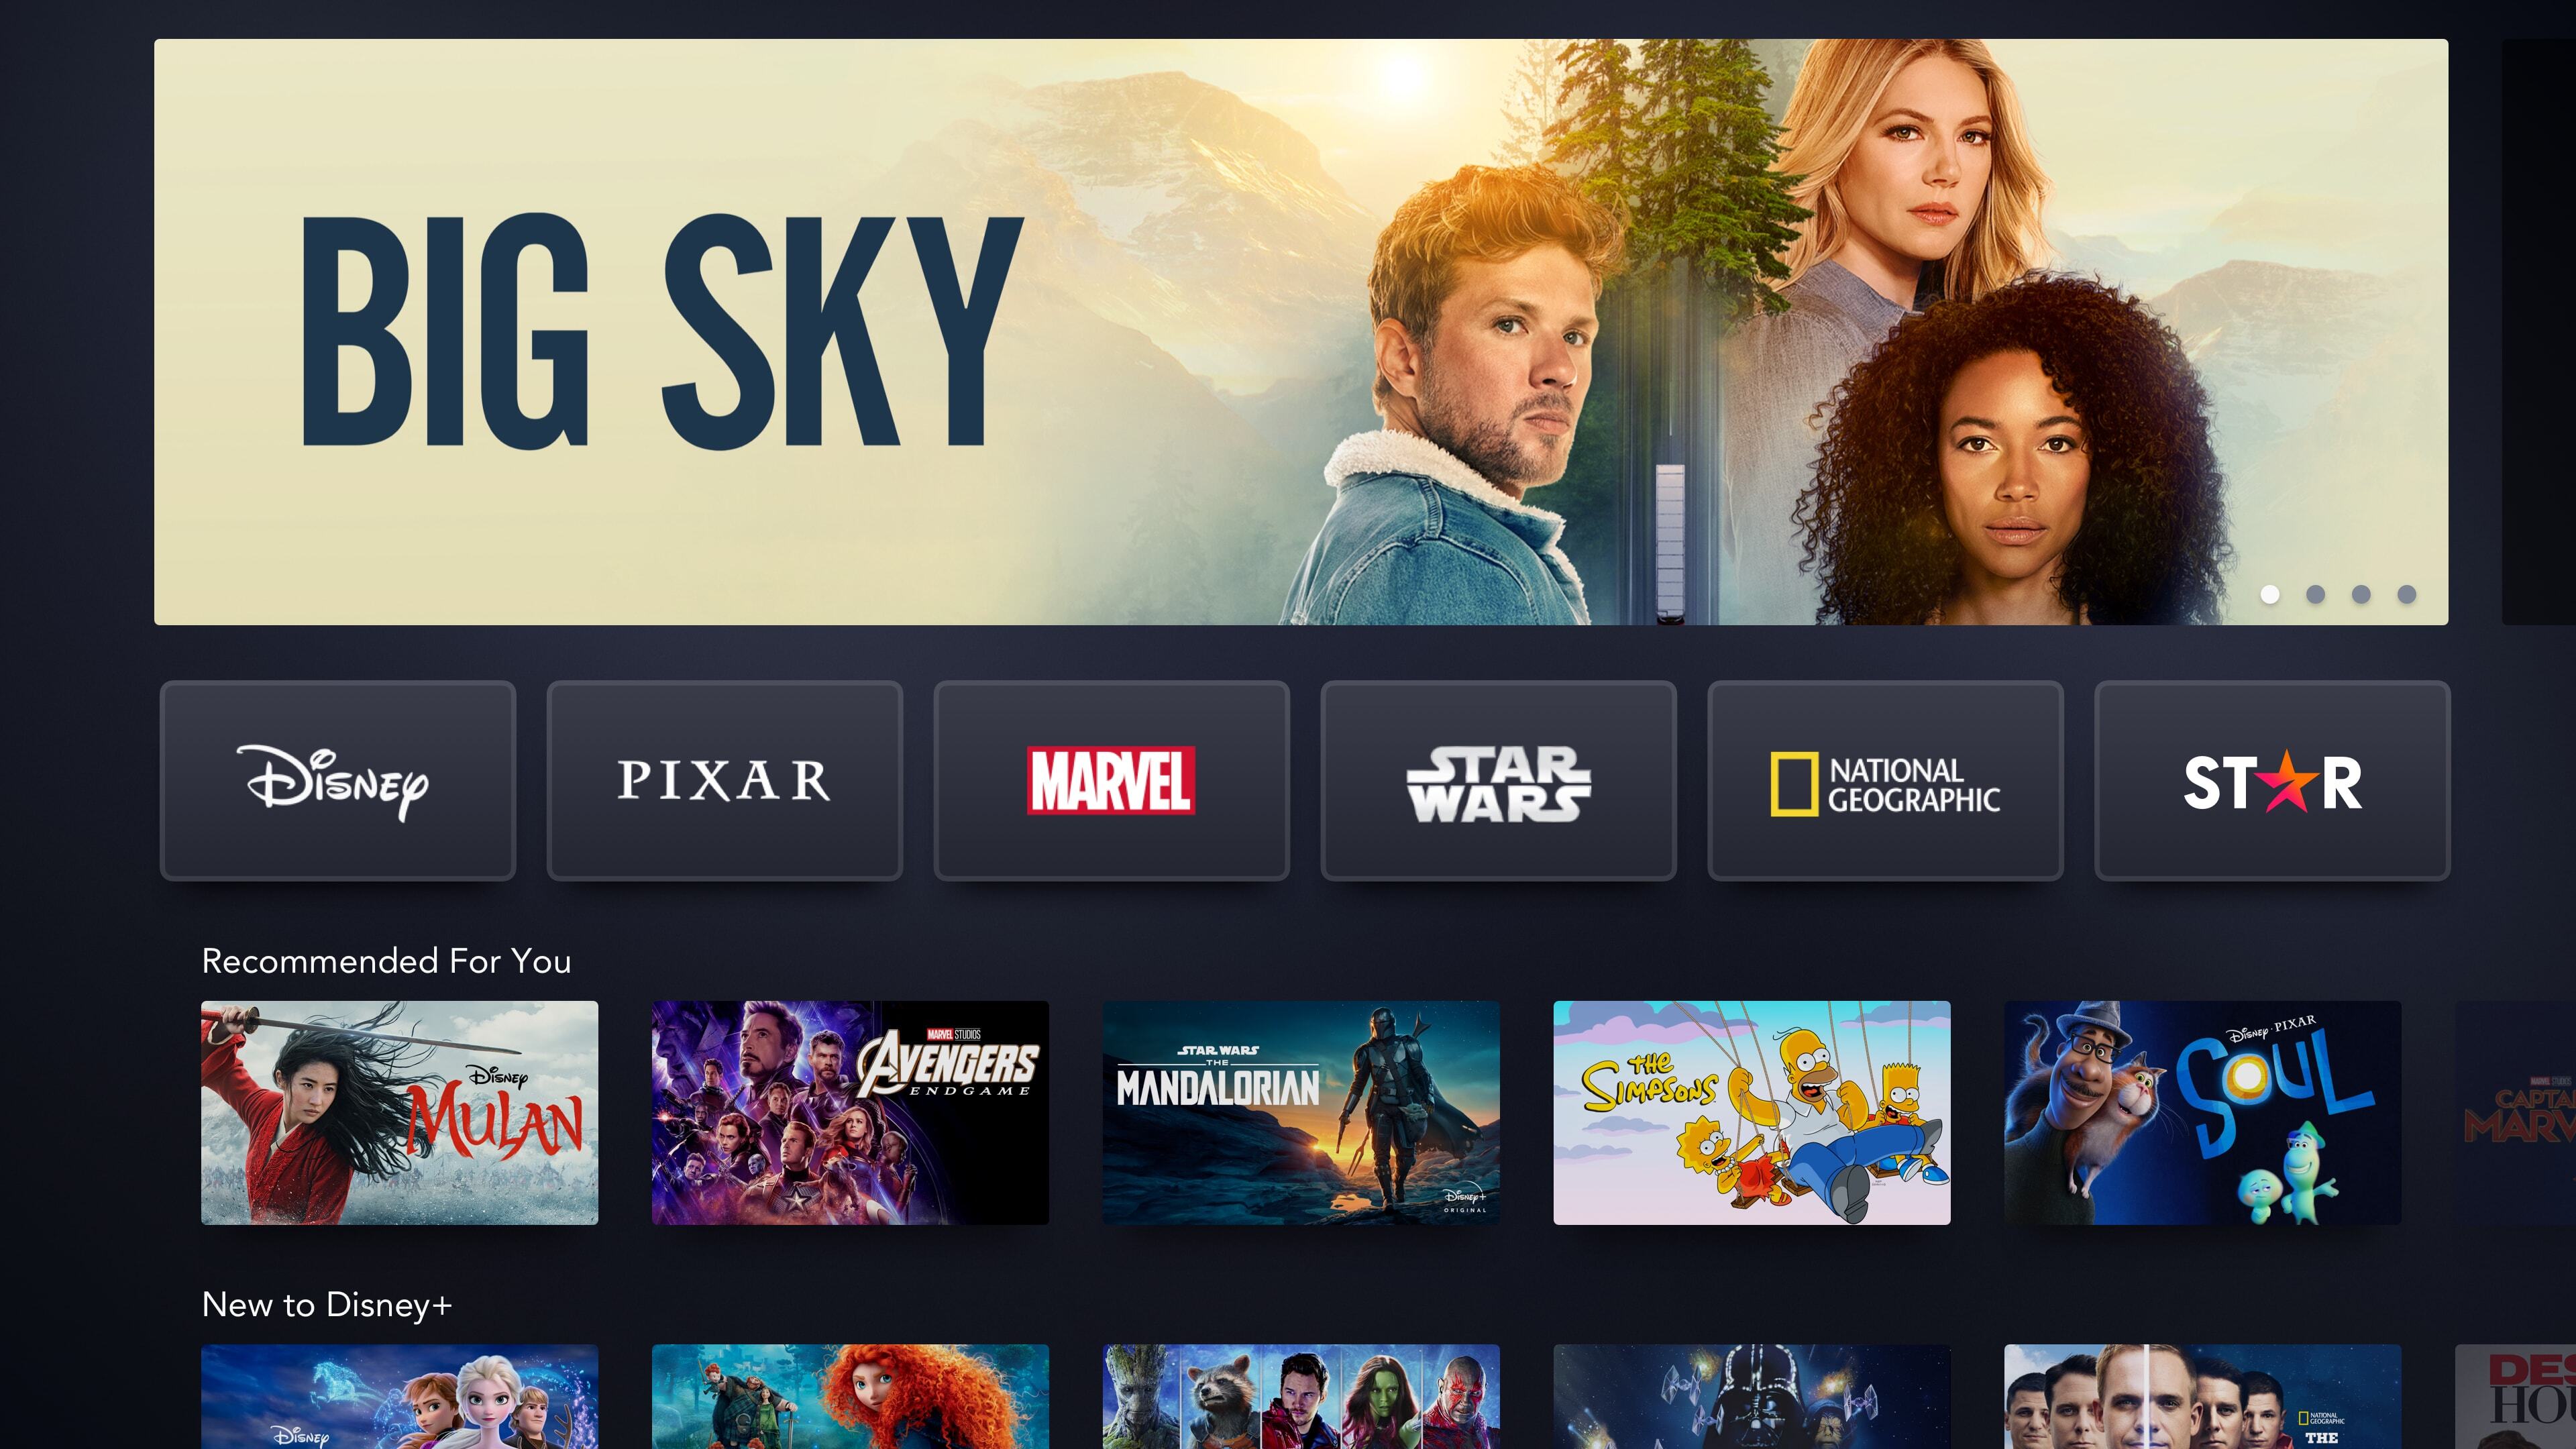 Disney+ Launches Star Today: What to Know About the New Disney+ Content Brand